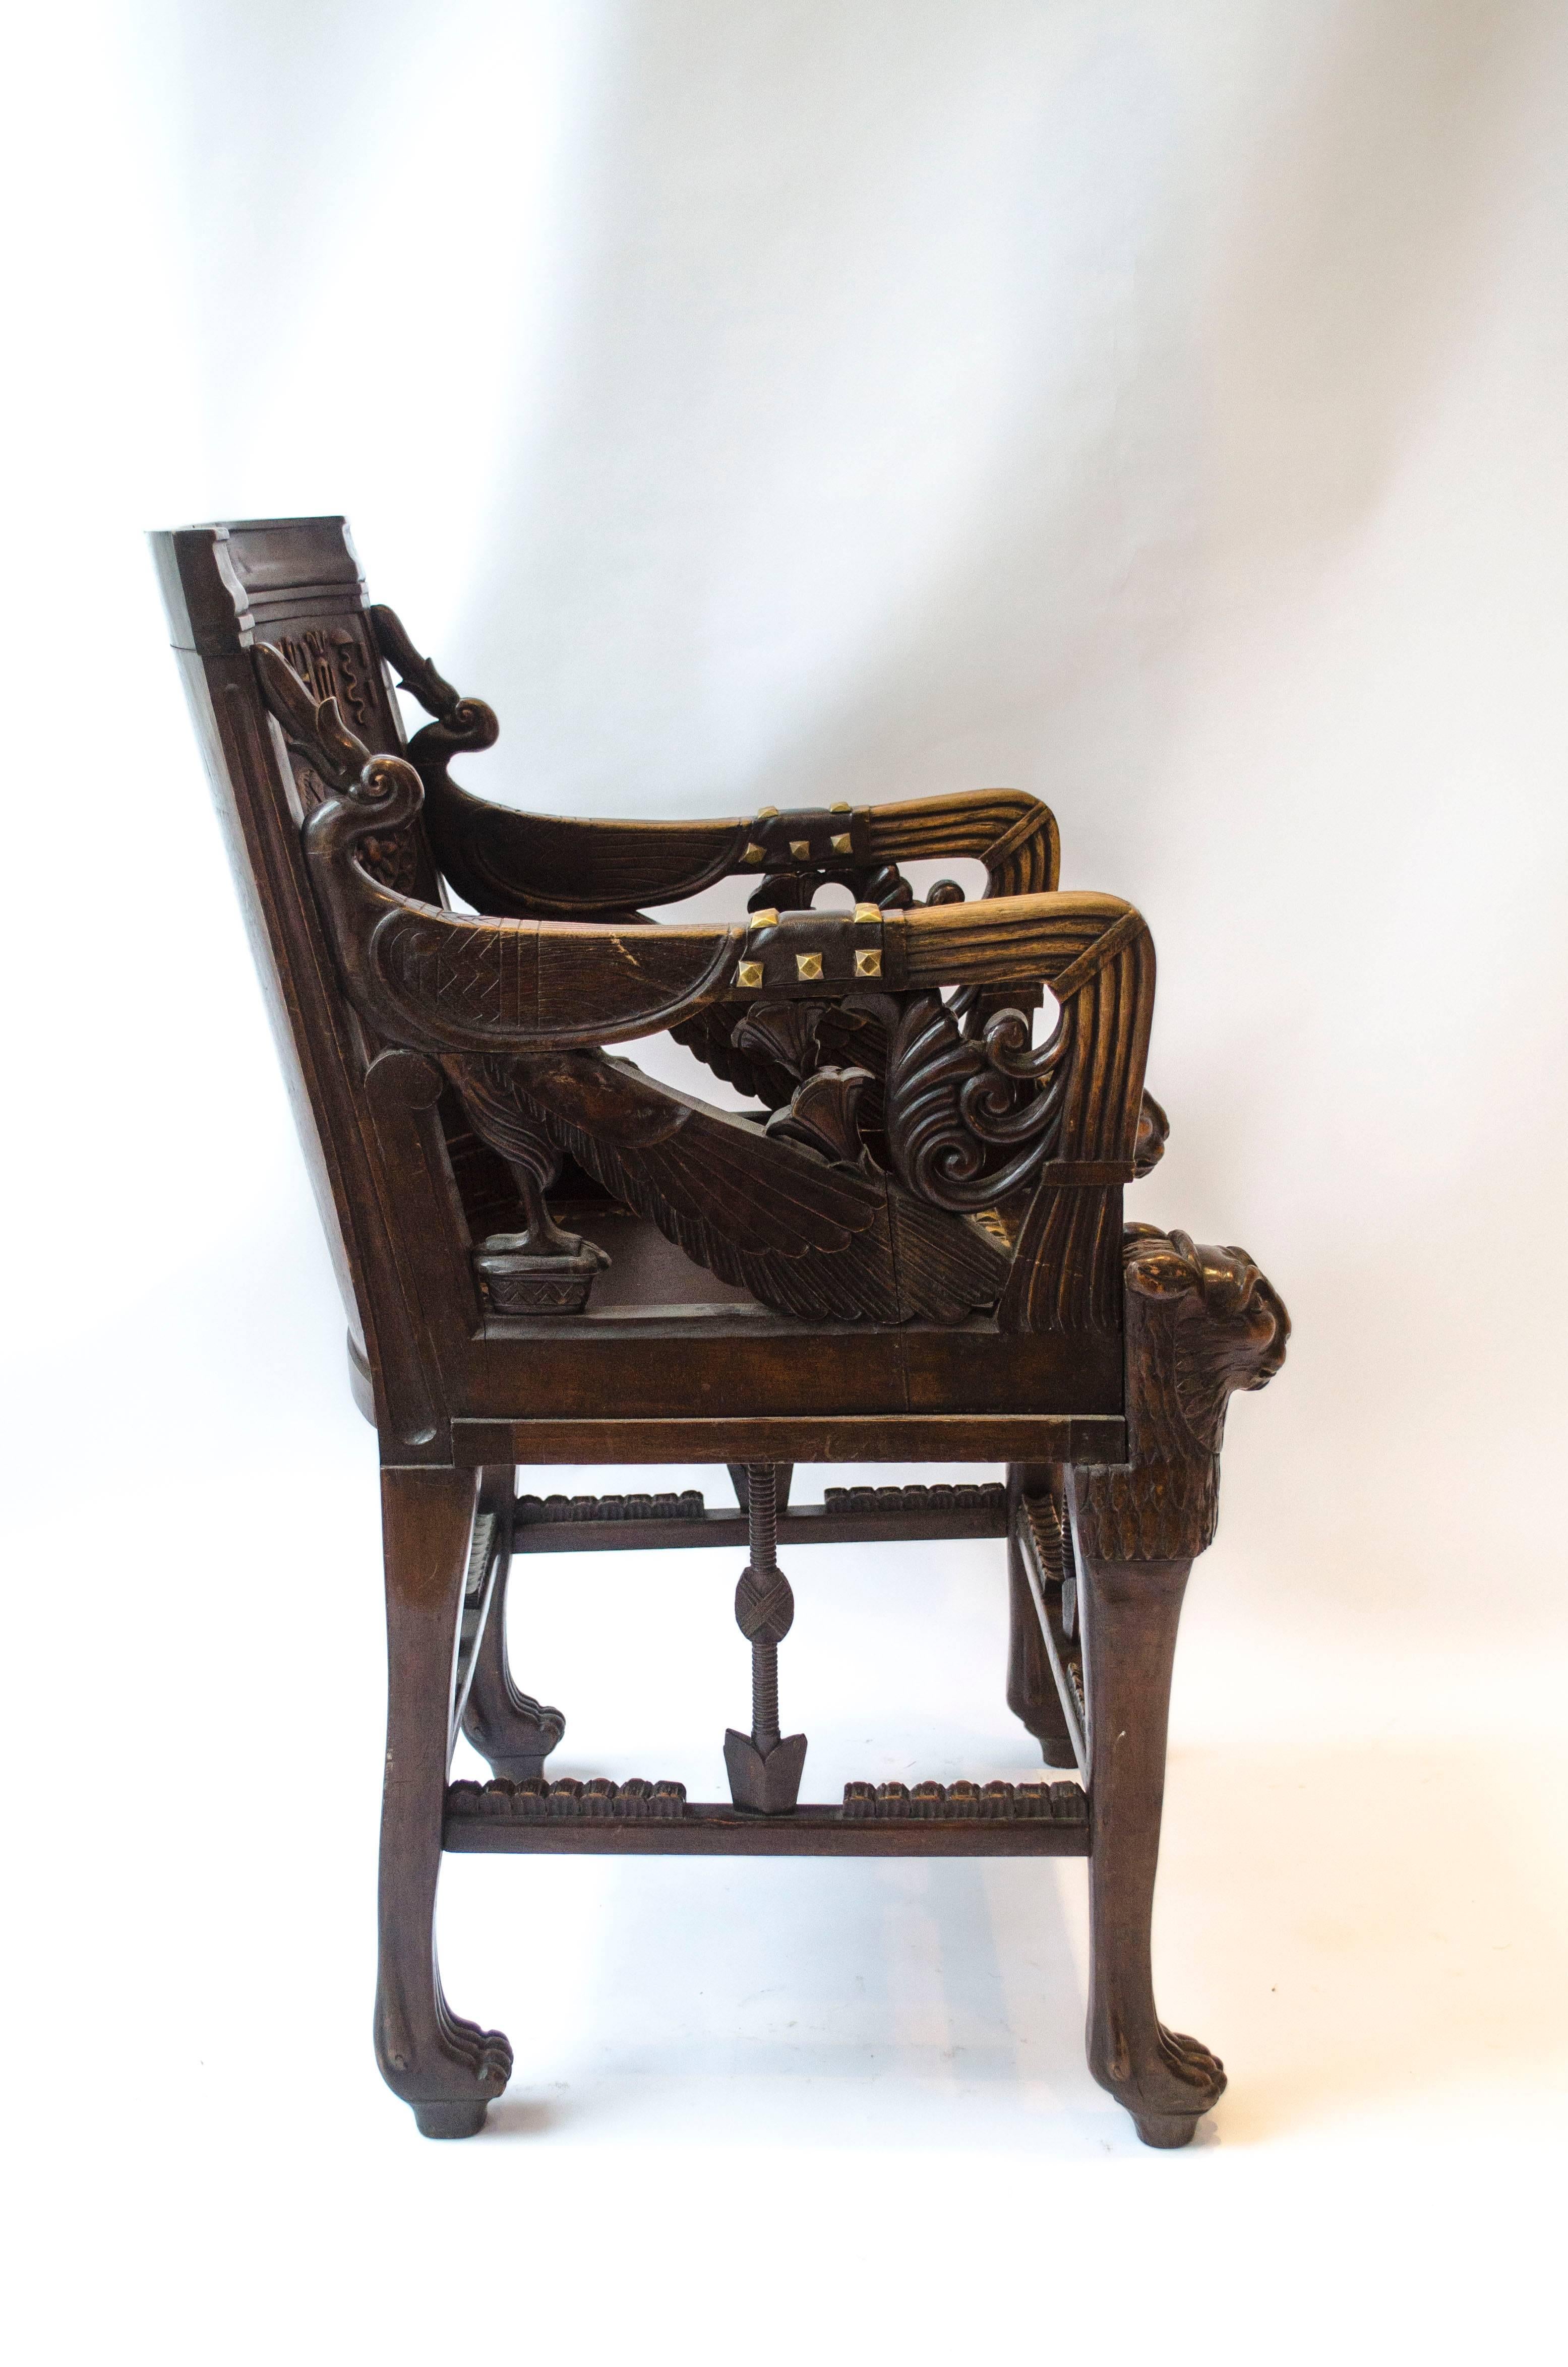 An early Egyptian Revival carved walnut elbow chair, the curved back with a pharonic figural scene, a leather seat and arm pads with brass studs, the front legs lion headed, on paw feet. Modelled on Tutankhamun's golden throne discovered by Howard